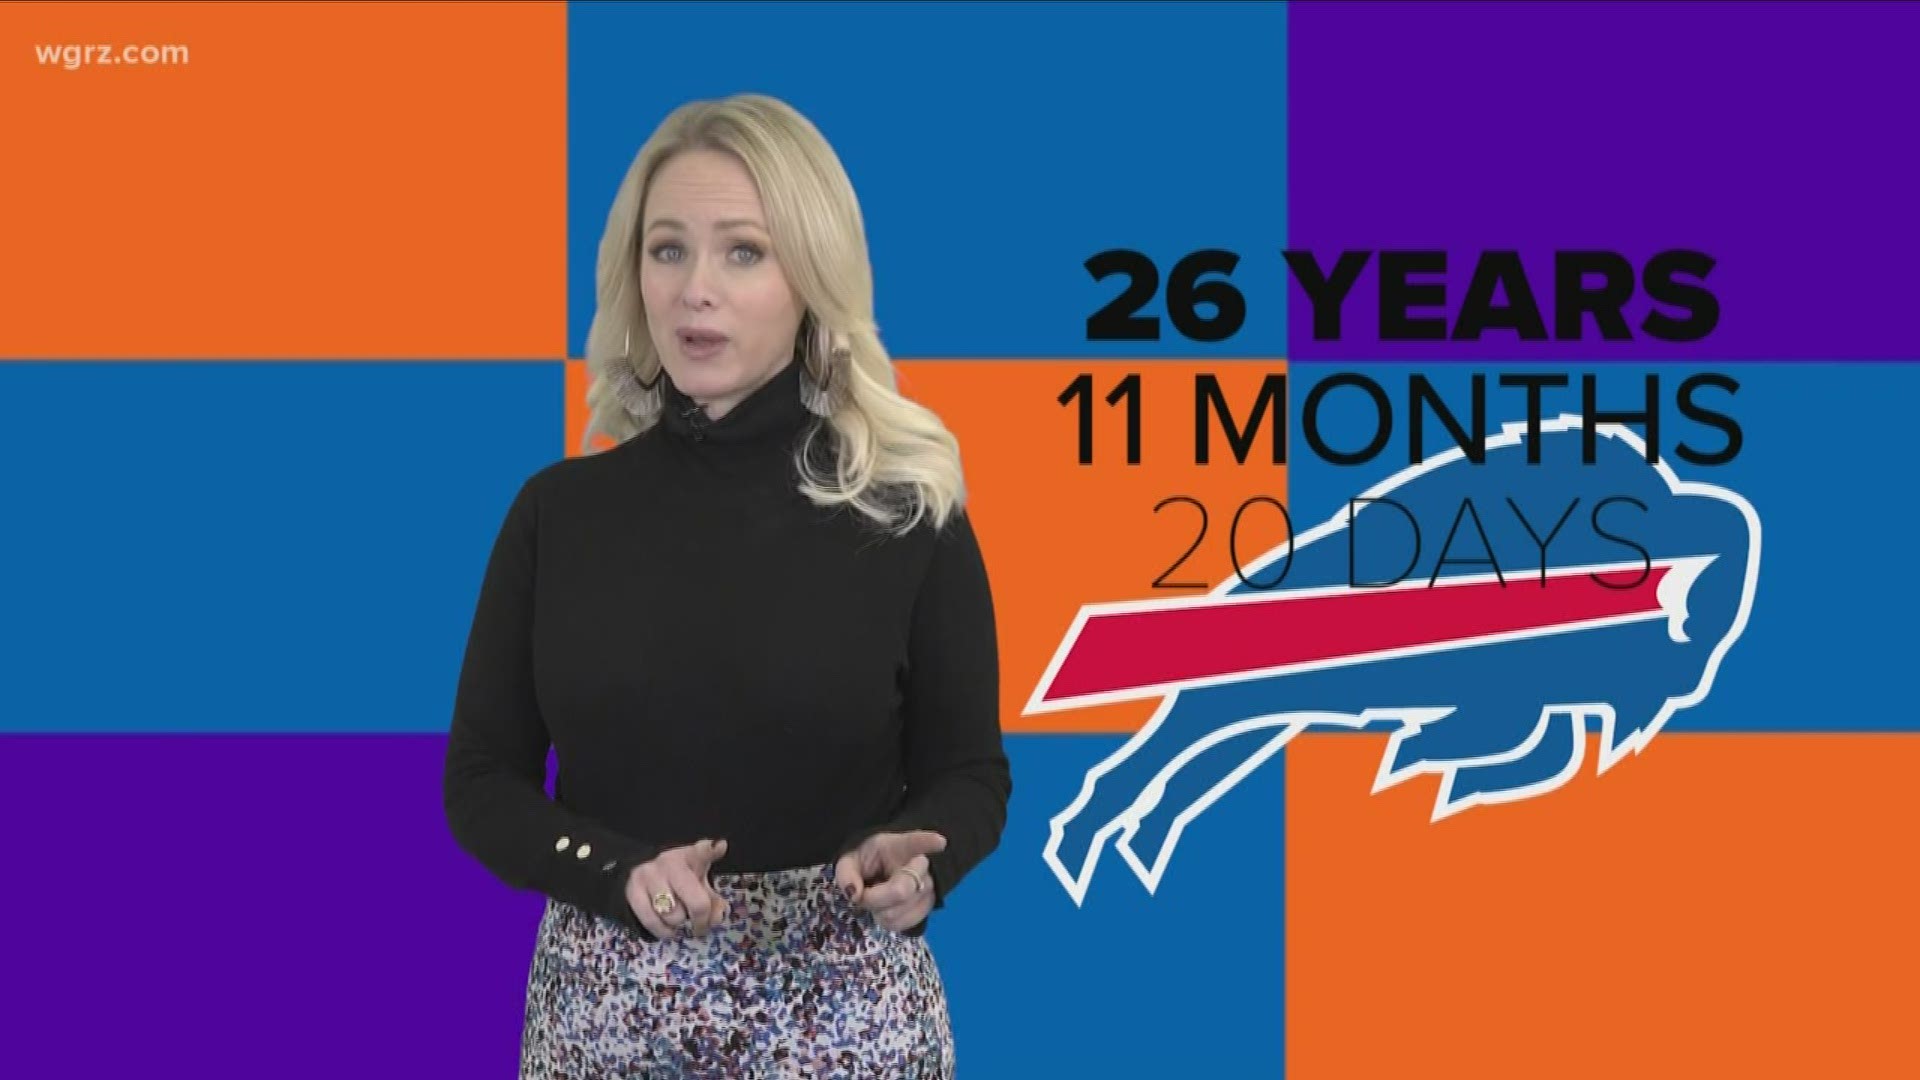 Most buffalo stories of the day: 'bills playoff tix giveaway'